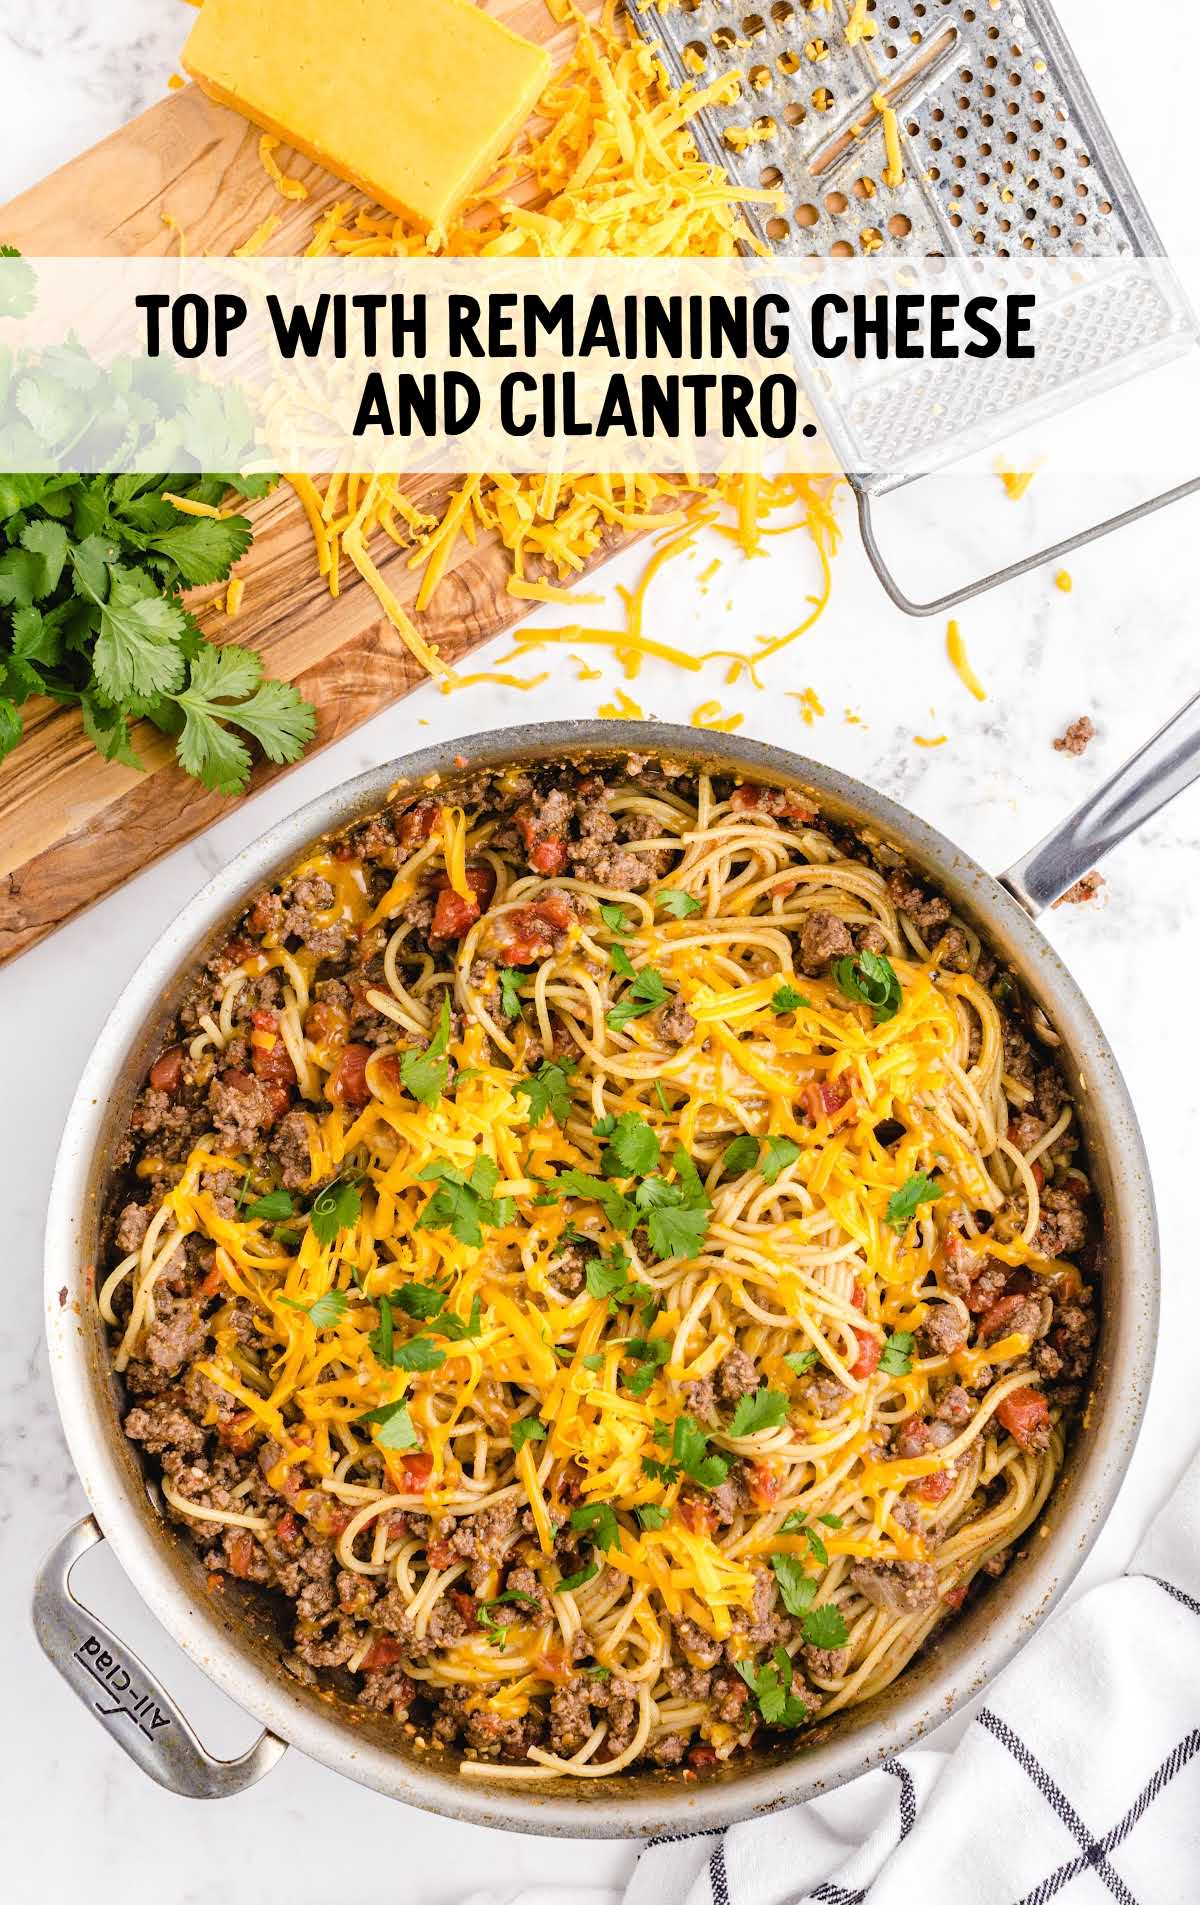 spaghetti topped with shredded cheese and cilantro